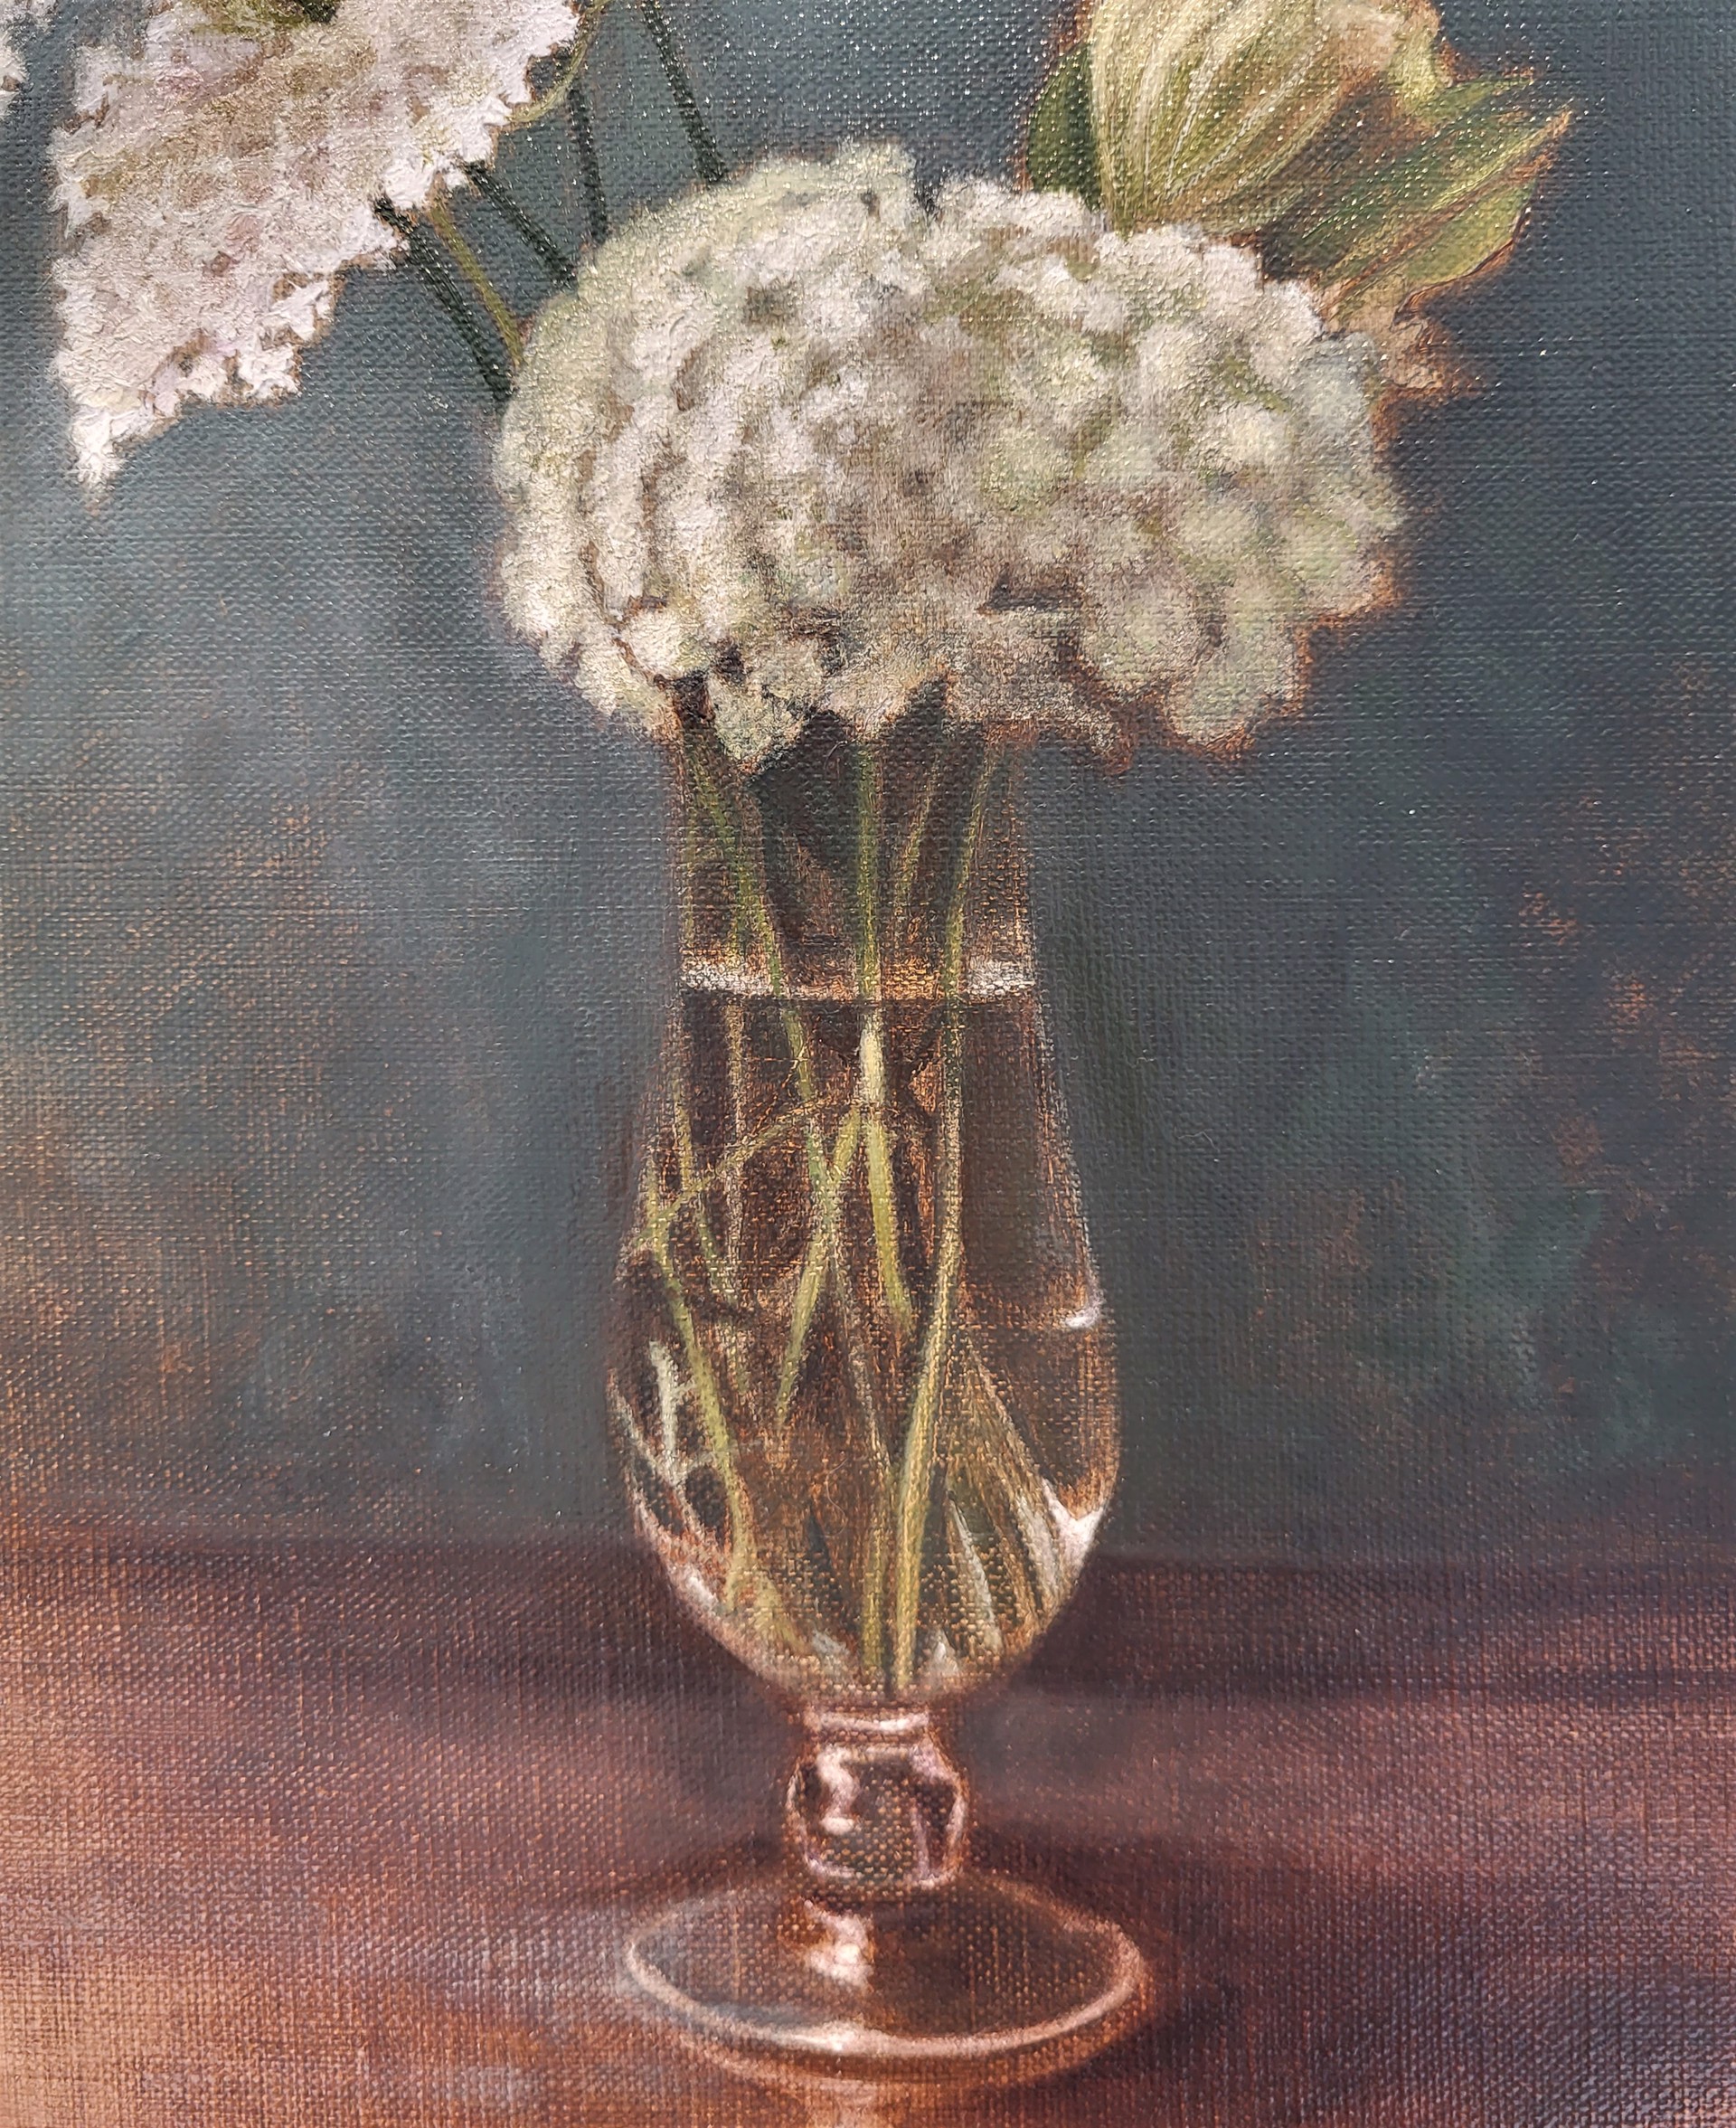 QUEEN ANNE'S LACE by MAXWELL NOLIN